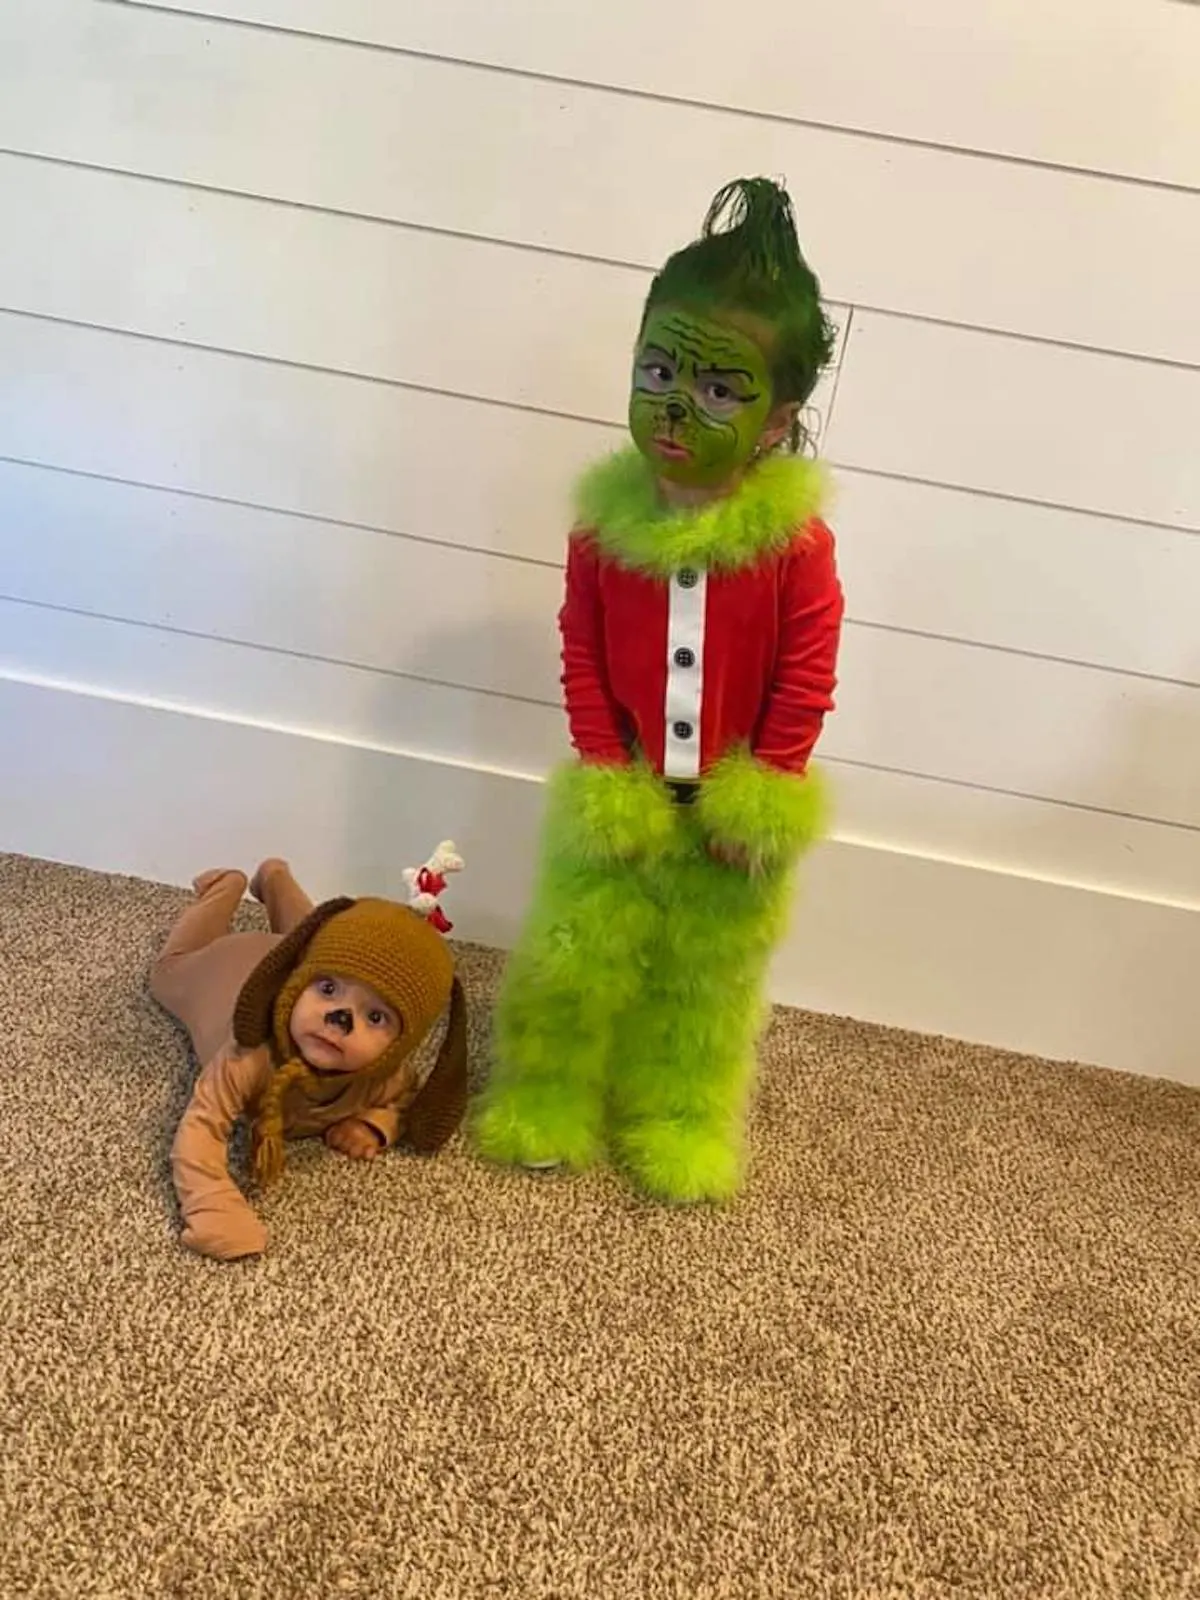 Boy wearing Grinch costume and baby wearing Max costume stand in front of white wall.